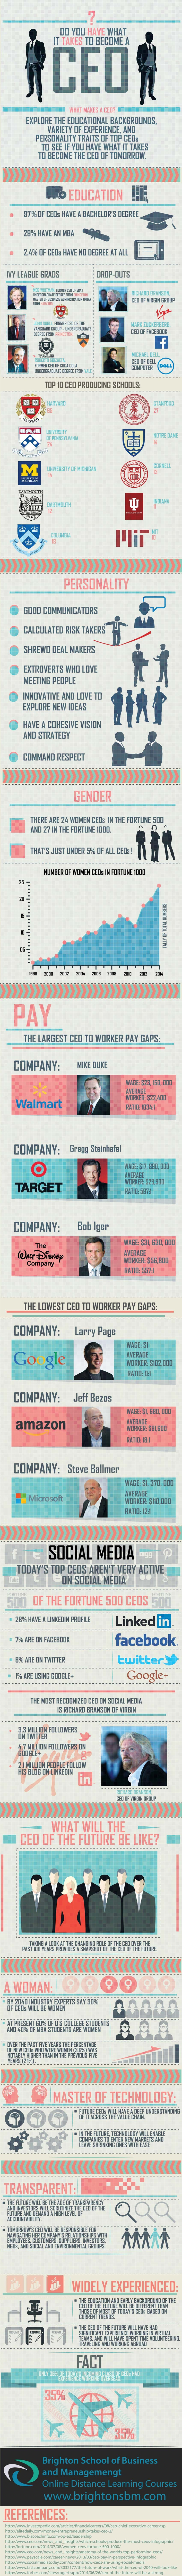 What makes a CEO - infographic